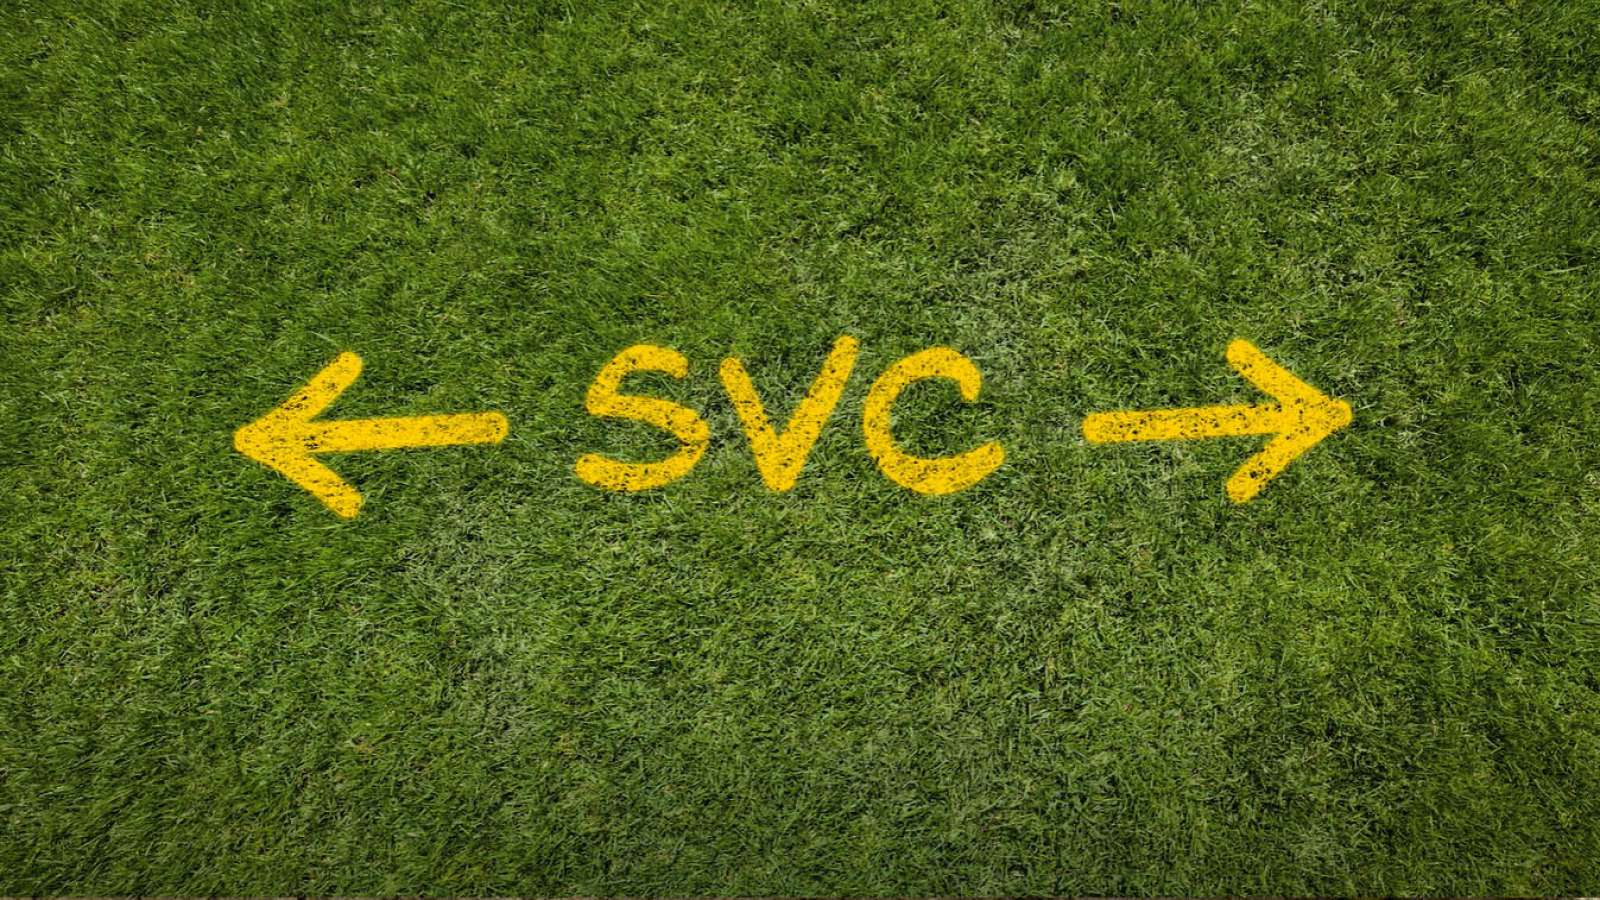 arrows with "SVC" spray painted in yellow on grass